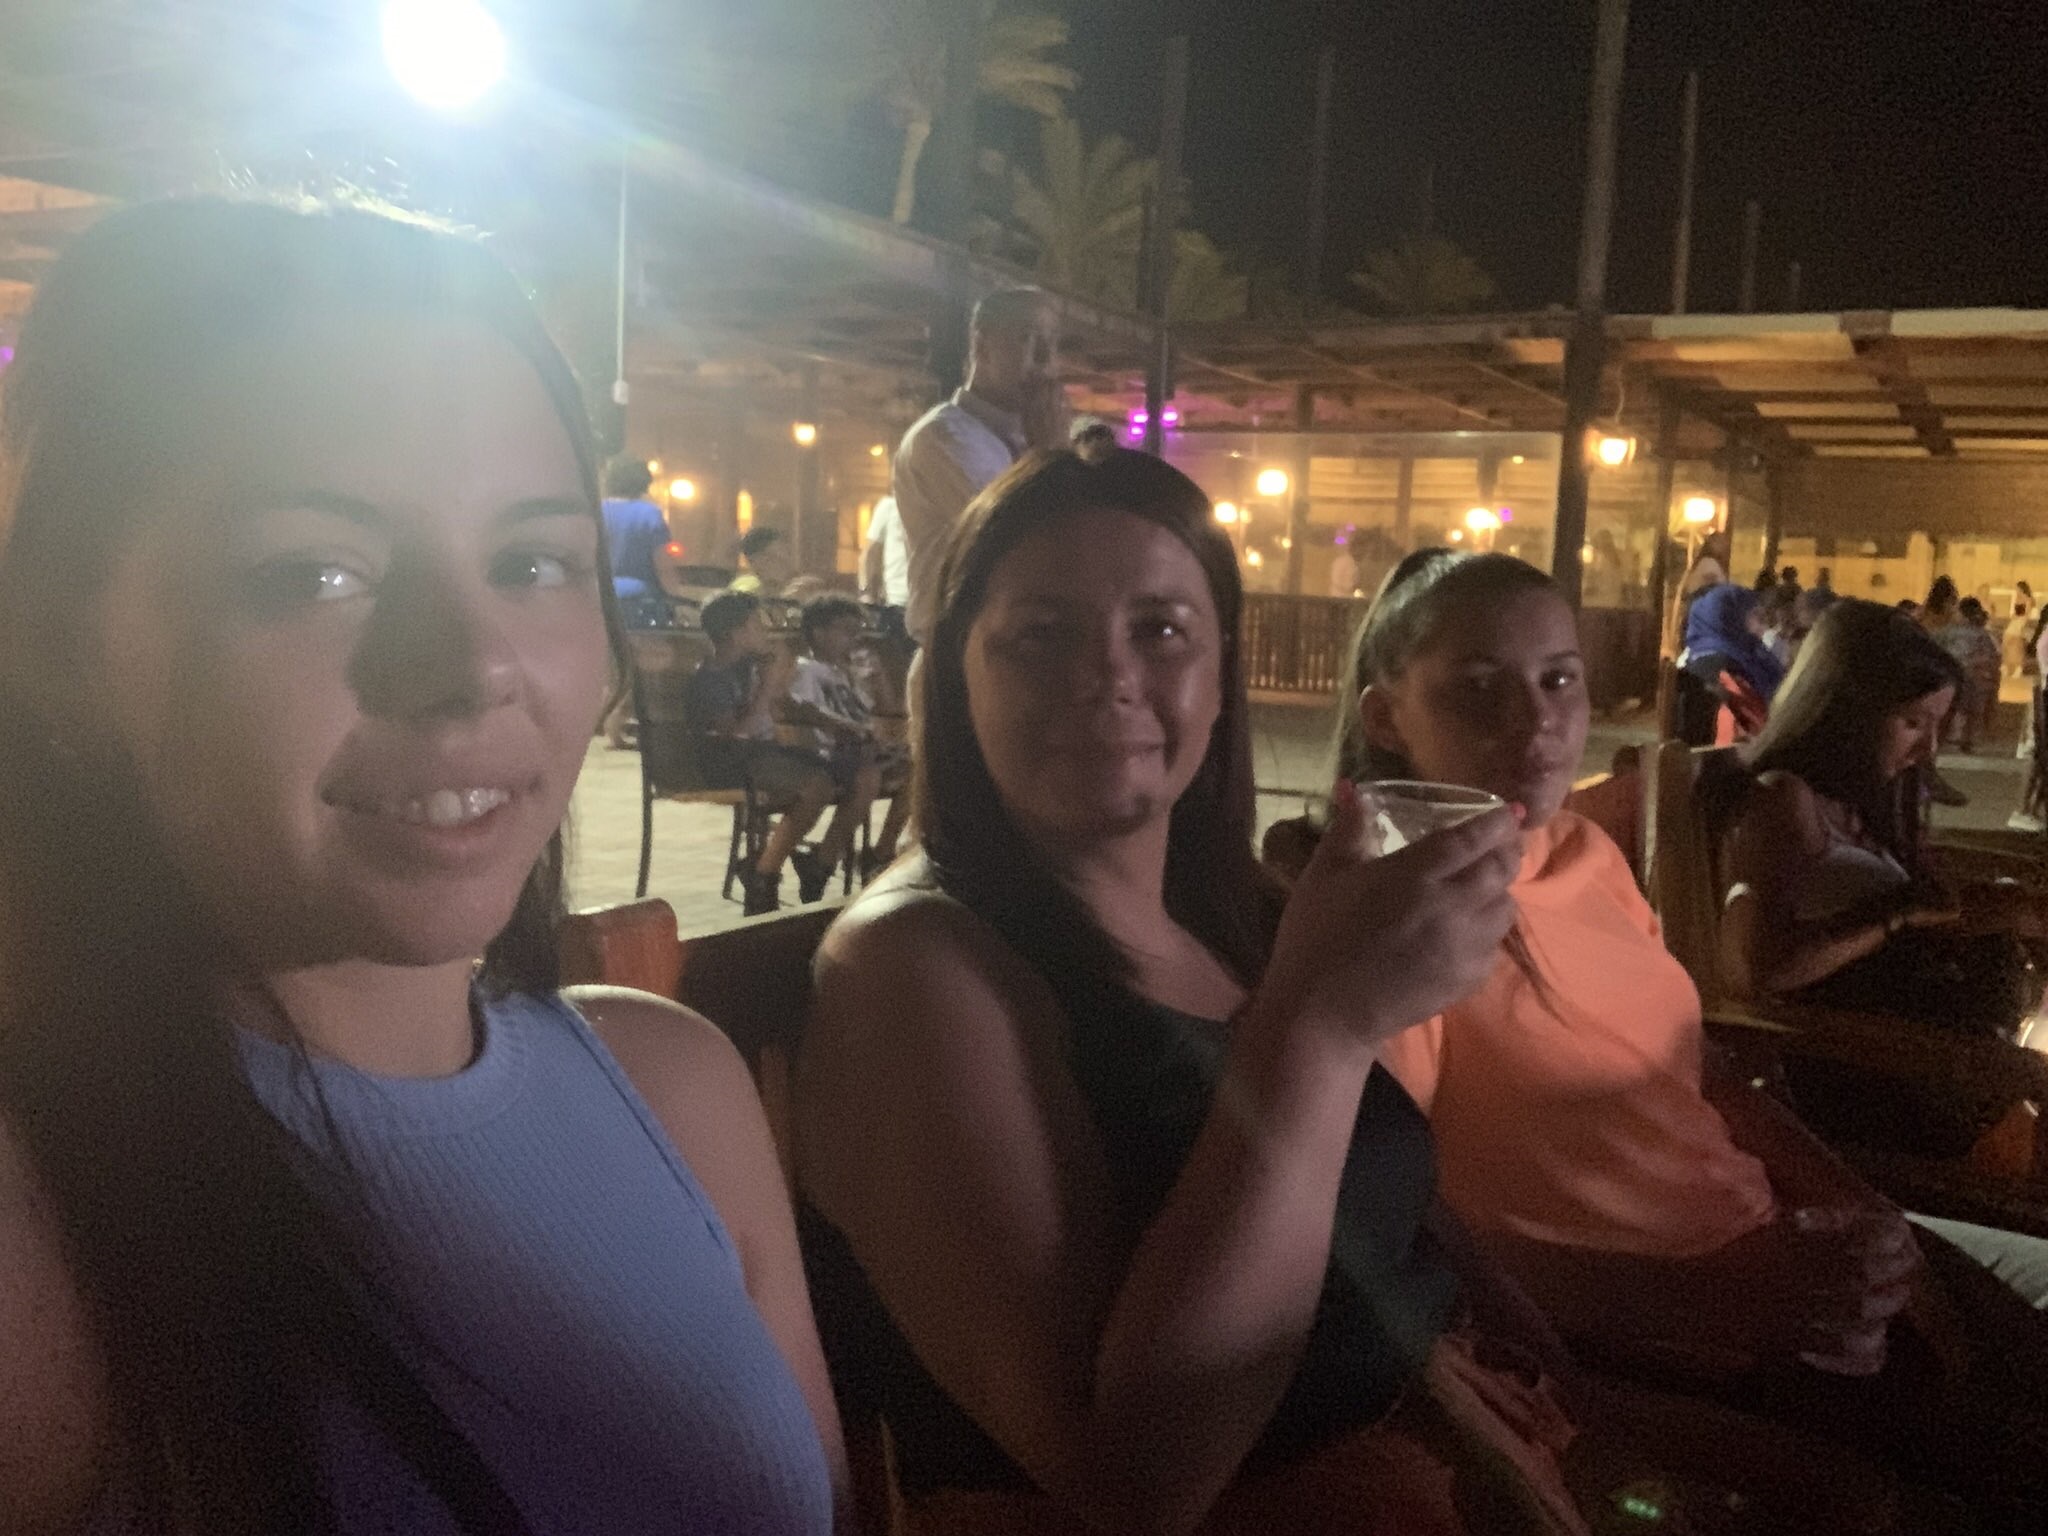 Kelly Chadwick, 42, from Accrington, Lancashire, will be watching the highly anticipated match on Sunday whilst on holiday with her two daughters, Charlie, 16, and Katie, 18. 